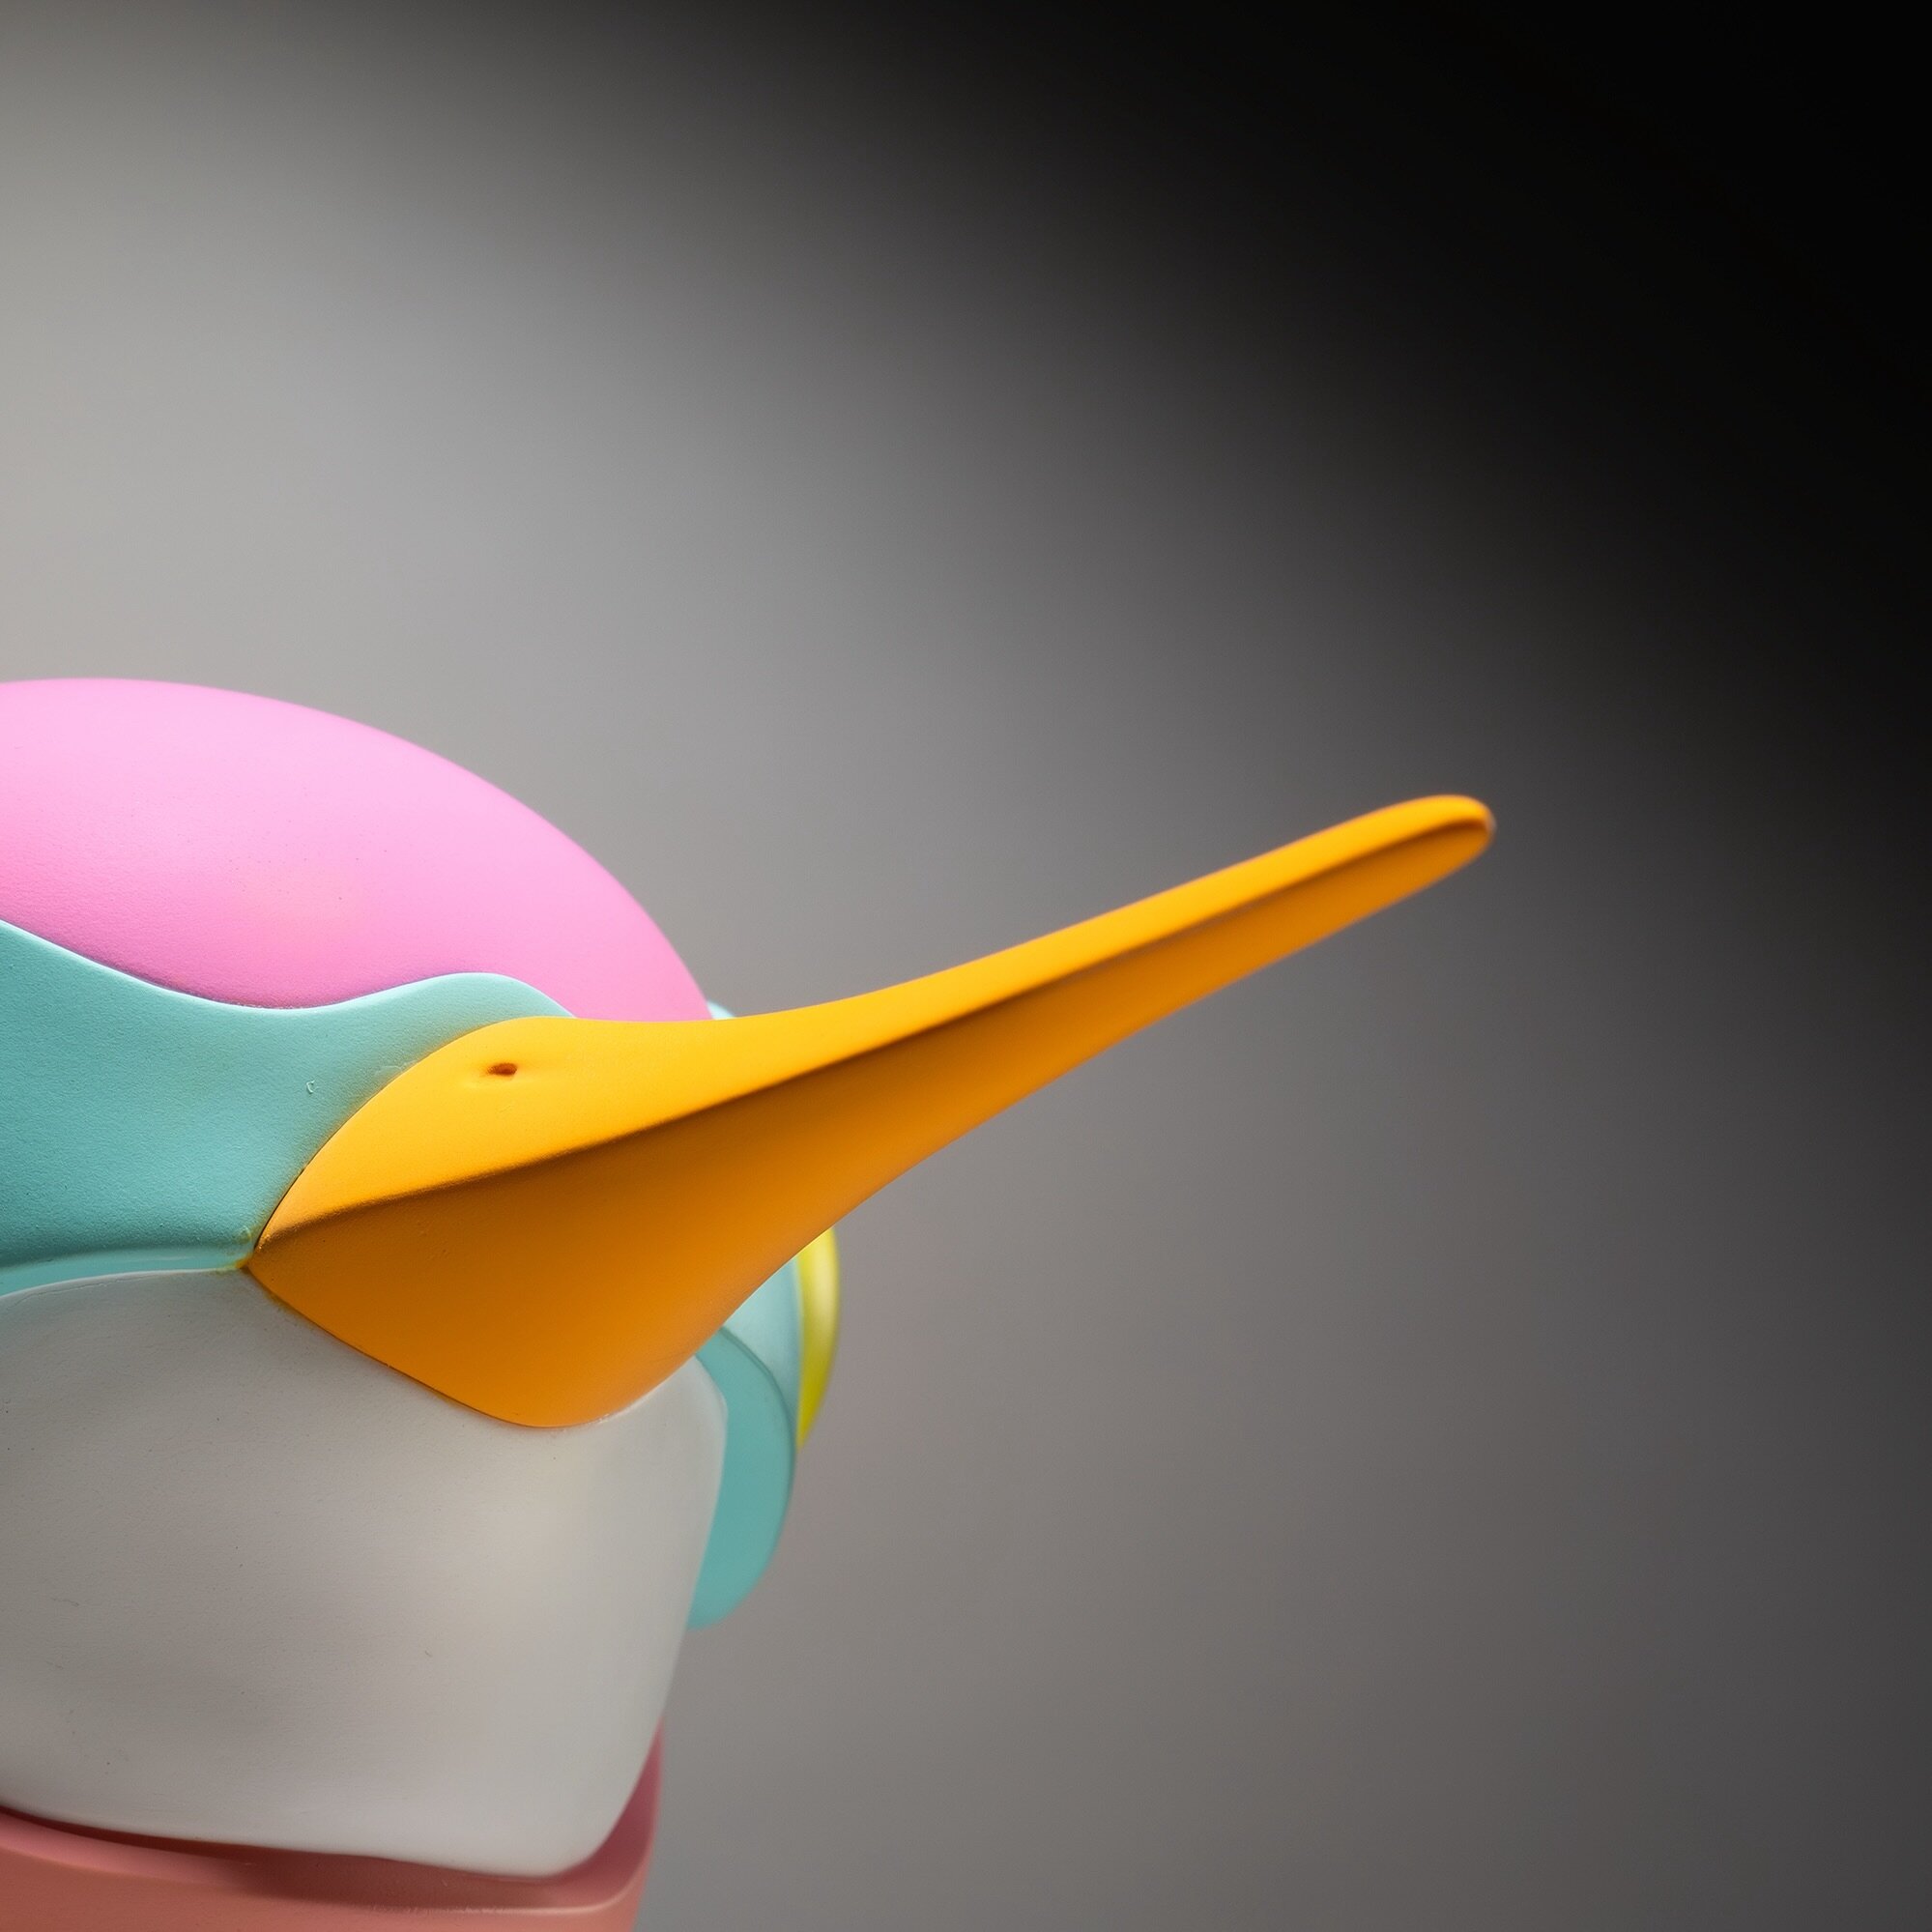 We are thrilled to introduce you to KOKO, the blissful hummingbird from our recent solo exhibition who is about to take flight in vinyl for the very first time.  
KOKO 
6&rsquo;&rsquo; and 4&rsquo;&rsquo; vinyl sculptures 
Now available in limited qu